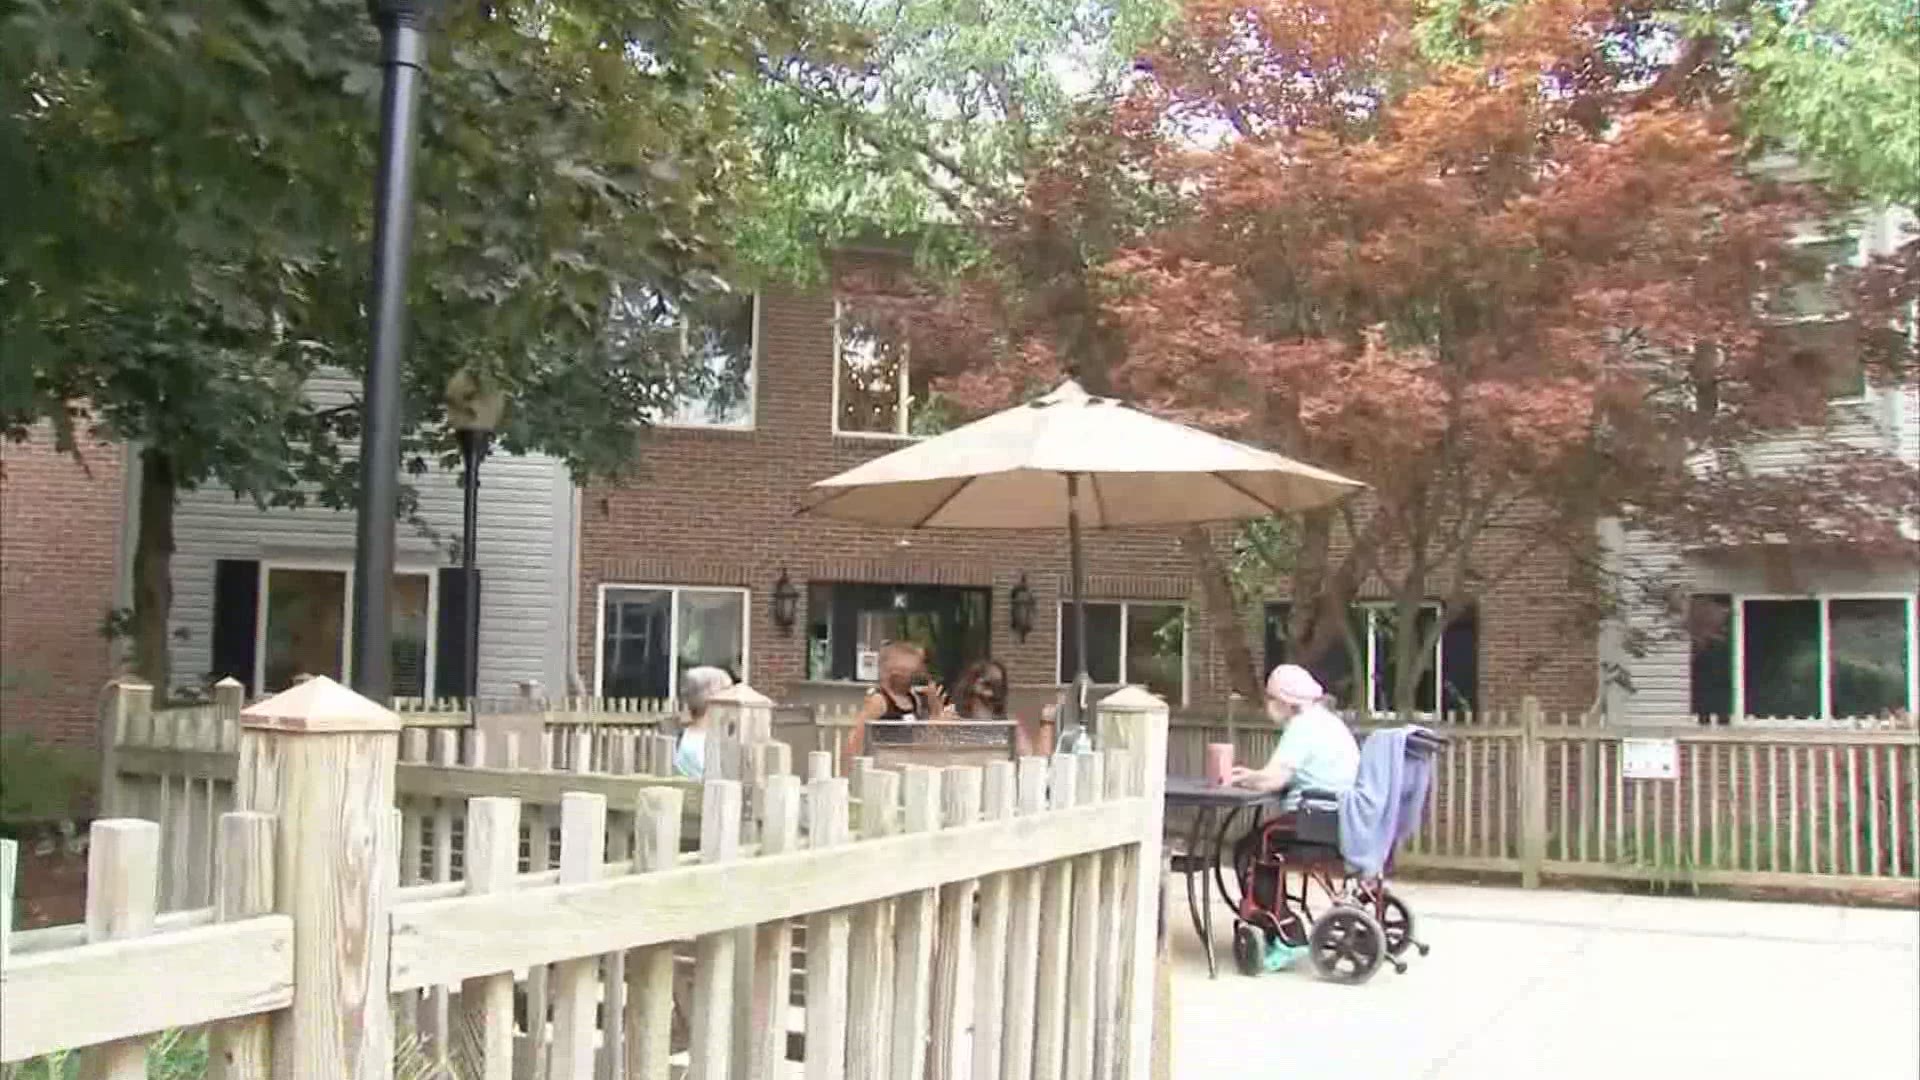 Ohio nursing home residents can now visit with family face-to-face and that means a lot to those who have had to wait.